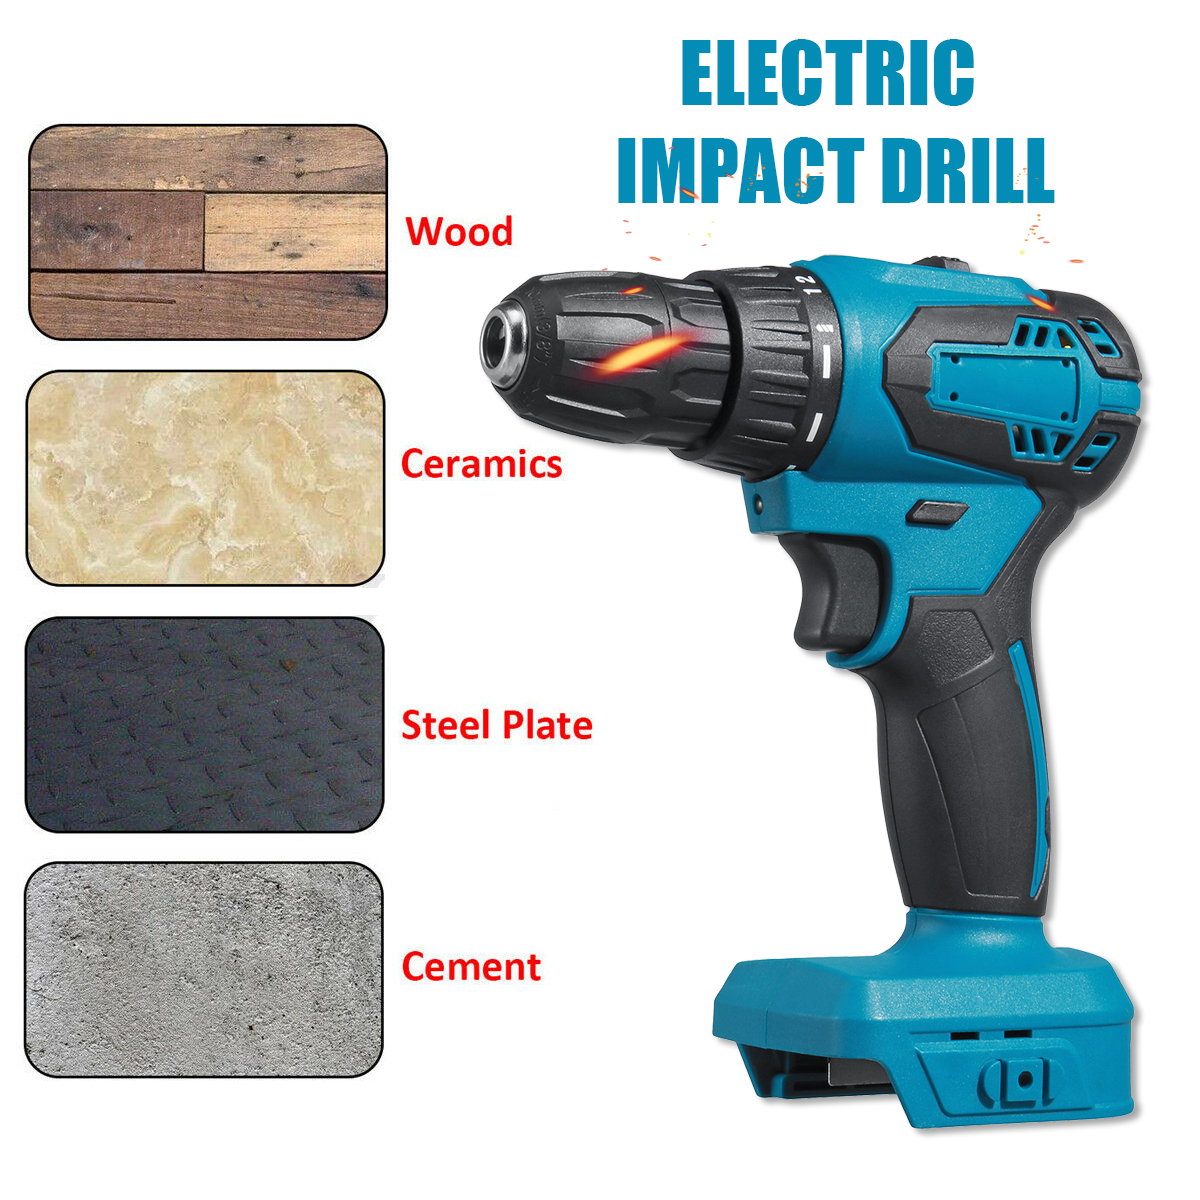 10mm-Rechargable-Electric-Drill-Screwdriver-1350RPM-2-Speed-Impact-Hand-Drill-Fit-Makita-Battery-1882944-8